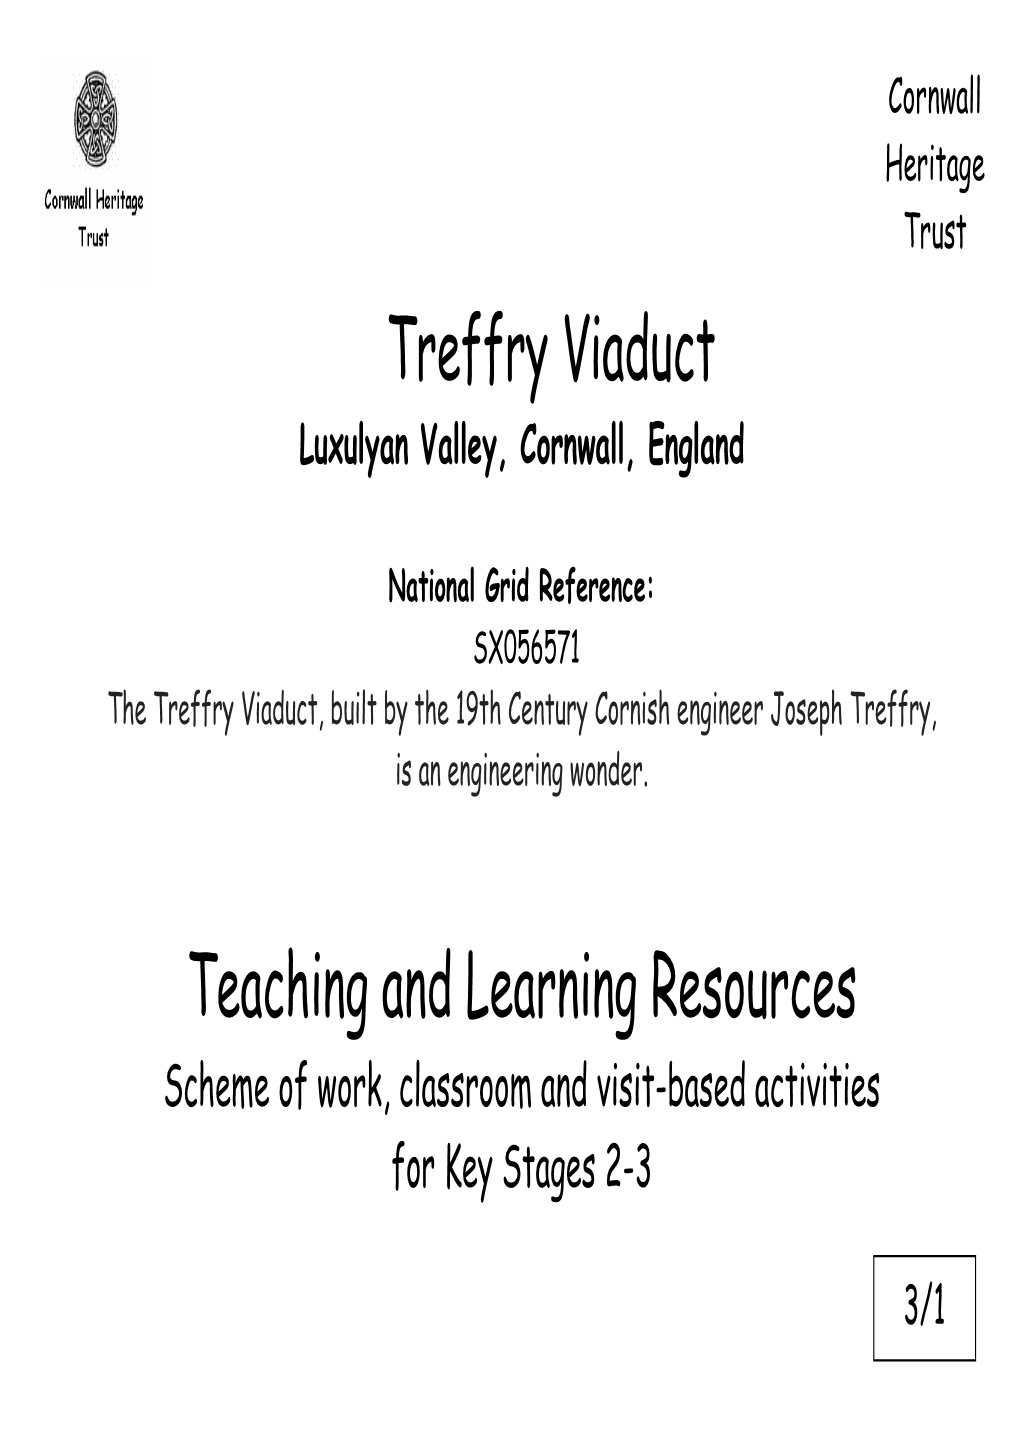 Treffry Viaduct Teaching and Learning Resources